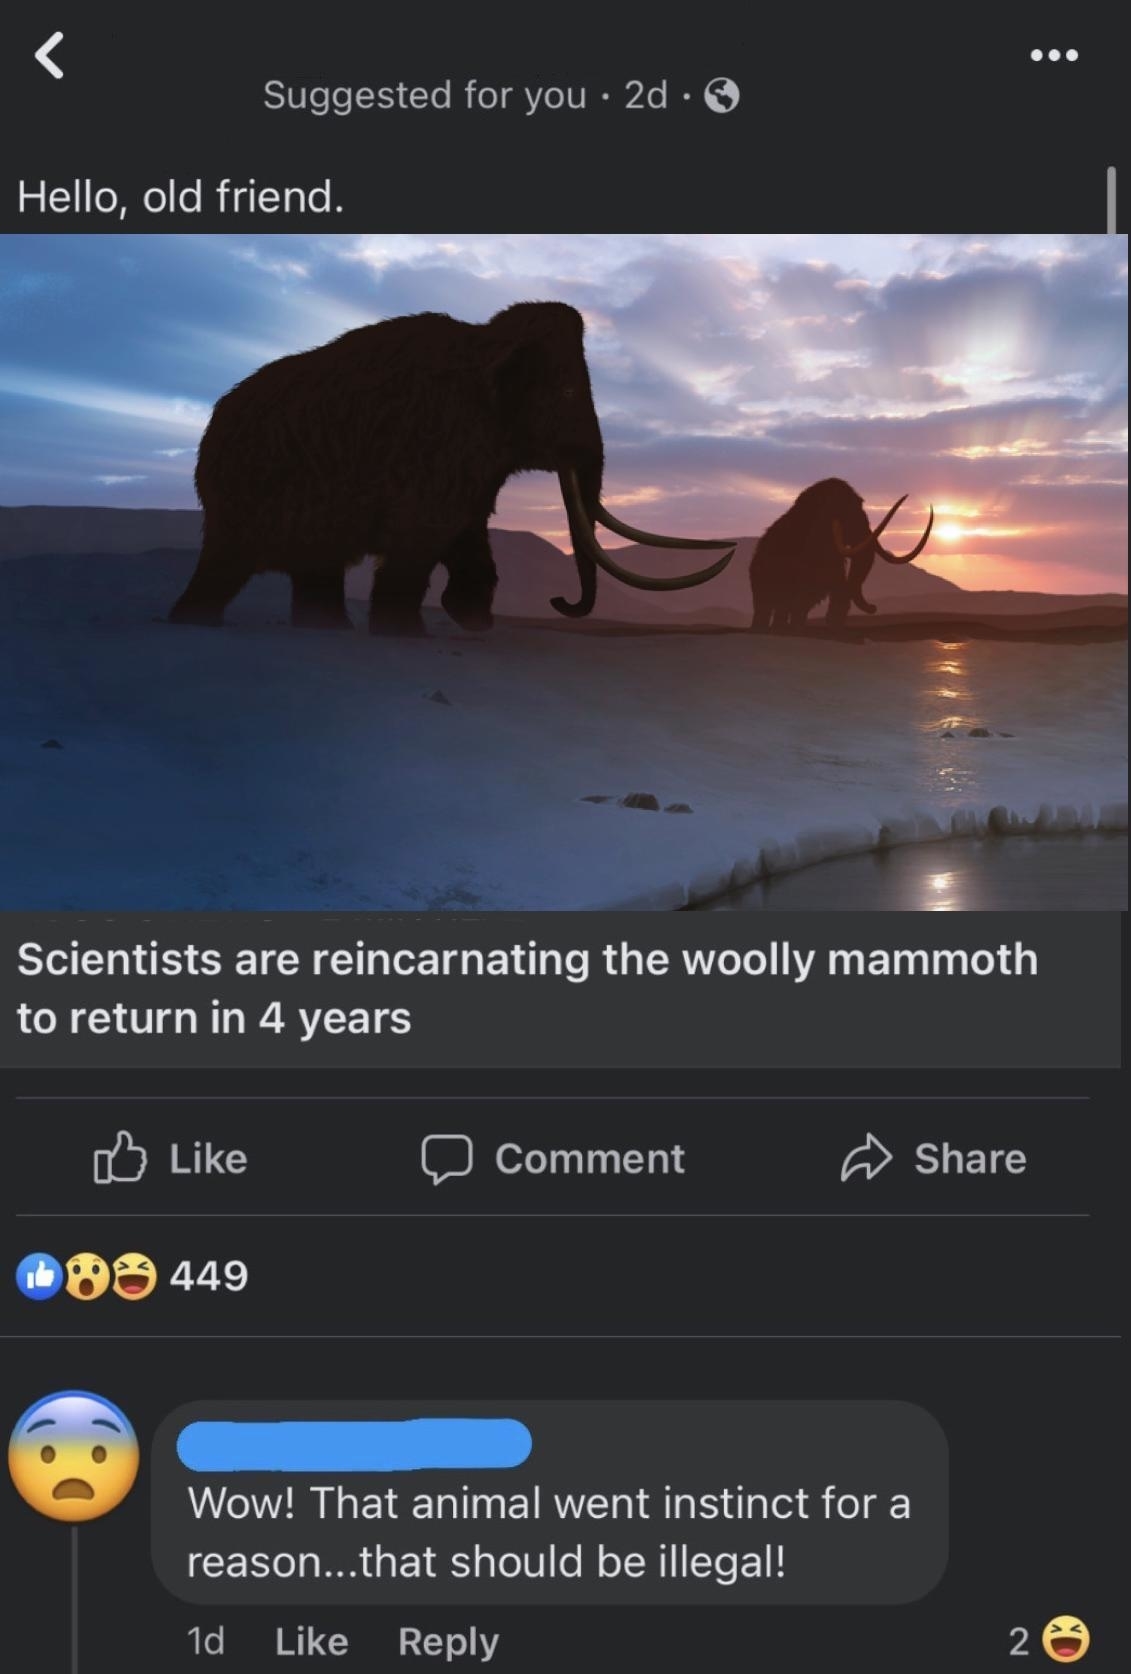 &quot;Scientists are reincarnating the woolly mammoth to return in 4 years,&quot; &quot;Wow! That animal went instinct for a reason; that should be illegal!&quot;